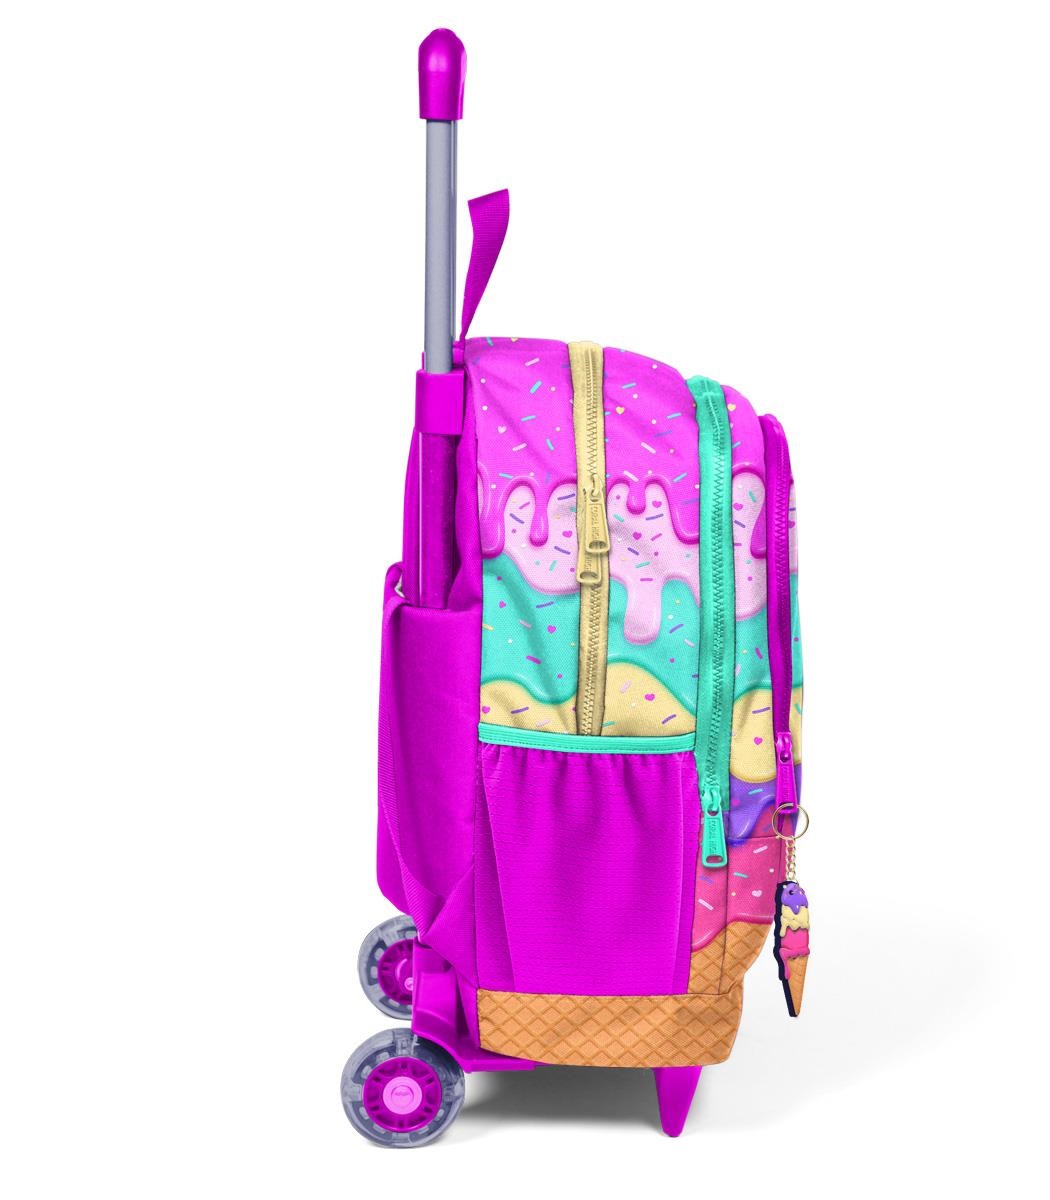 Coral High Kids Three Compartment Squeegee School Backpack - Pink Colorful Ice Cream Patterned